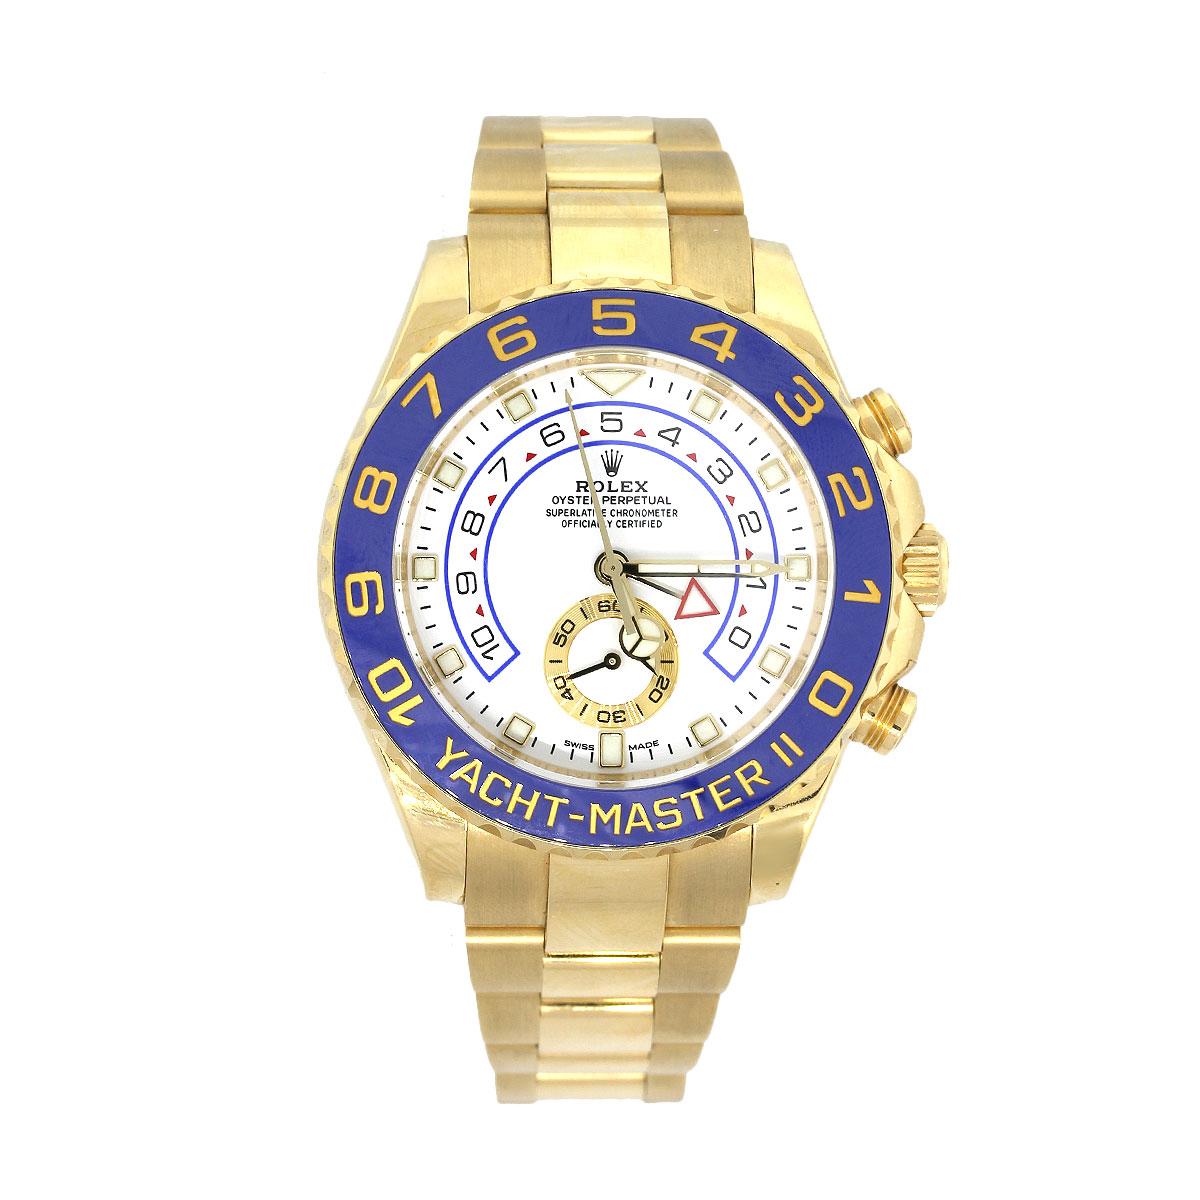 Brand: Rolex
MPN: 116688
Style: Yacht-Master II 18k Yellow Gold
Material: 18k Yellow Gold
Dial: White Dial with non-numeric luminescent markers and yellow gold mercedes hands.
Bezel: Bidirectional 18k yellow gold/blue bezel
Case Measurements: